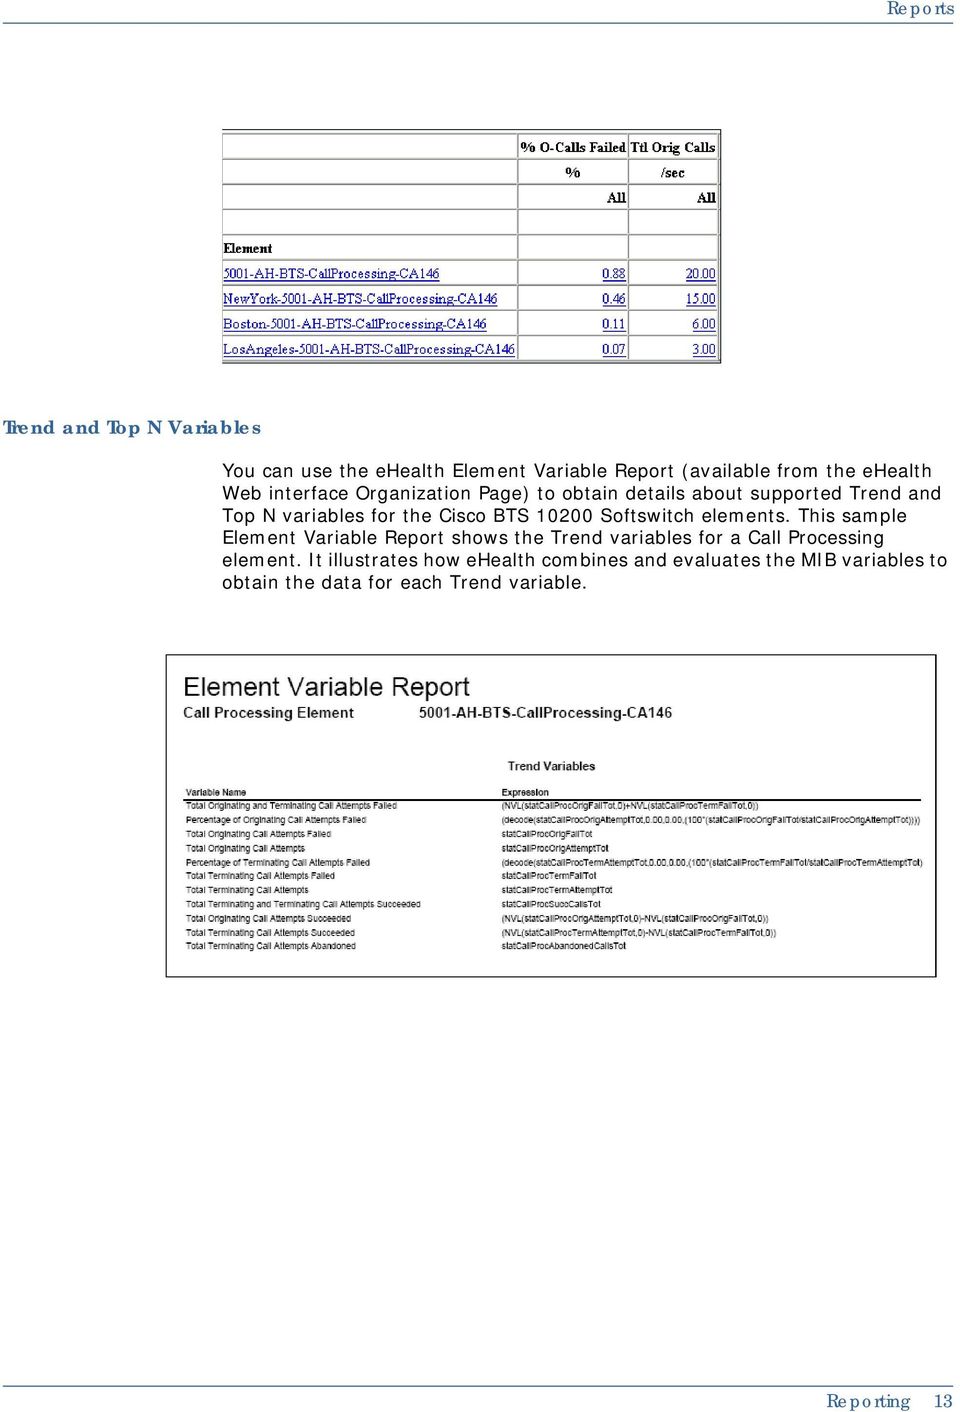 Softswitch elements. This sample Element Variable Report shows the Trend variables for a Call Processing element.